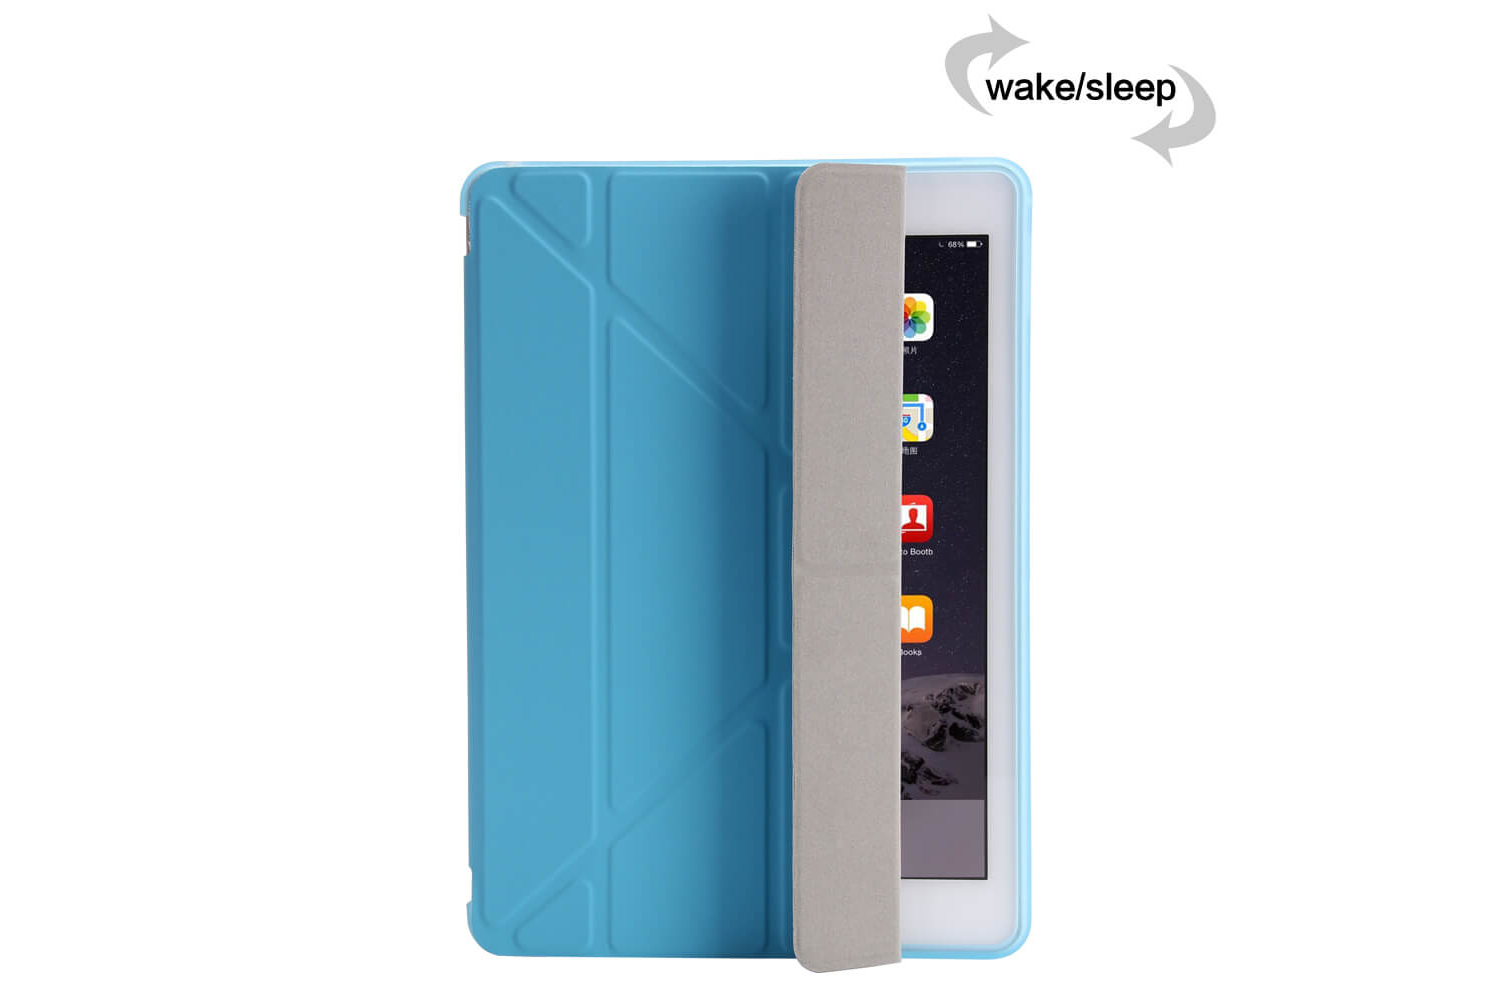 Flipstand Cover iPad Air 2 blauw 